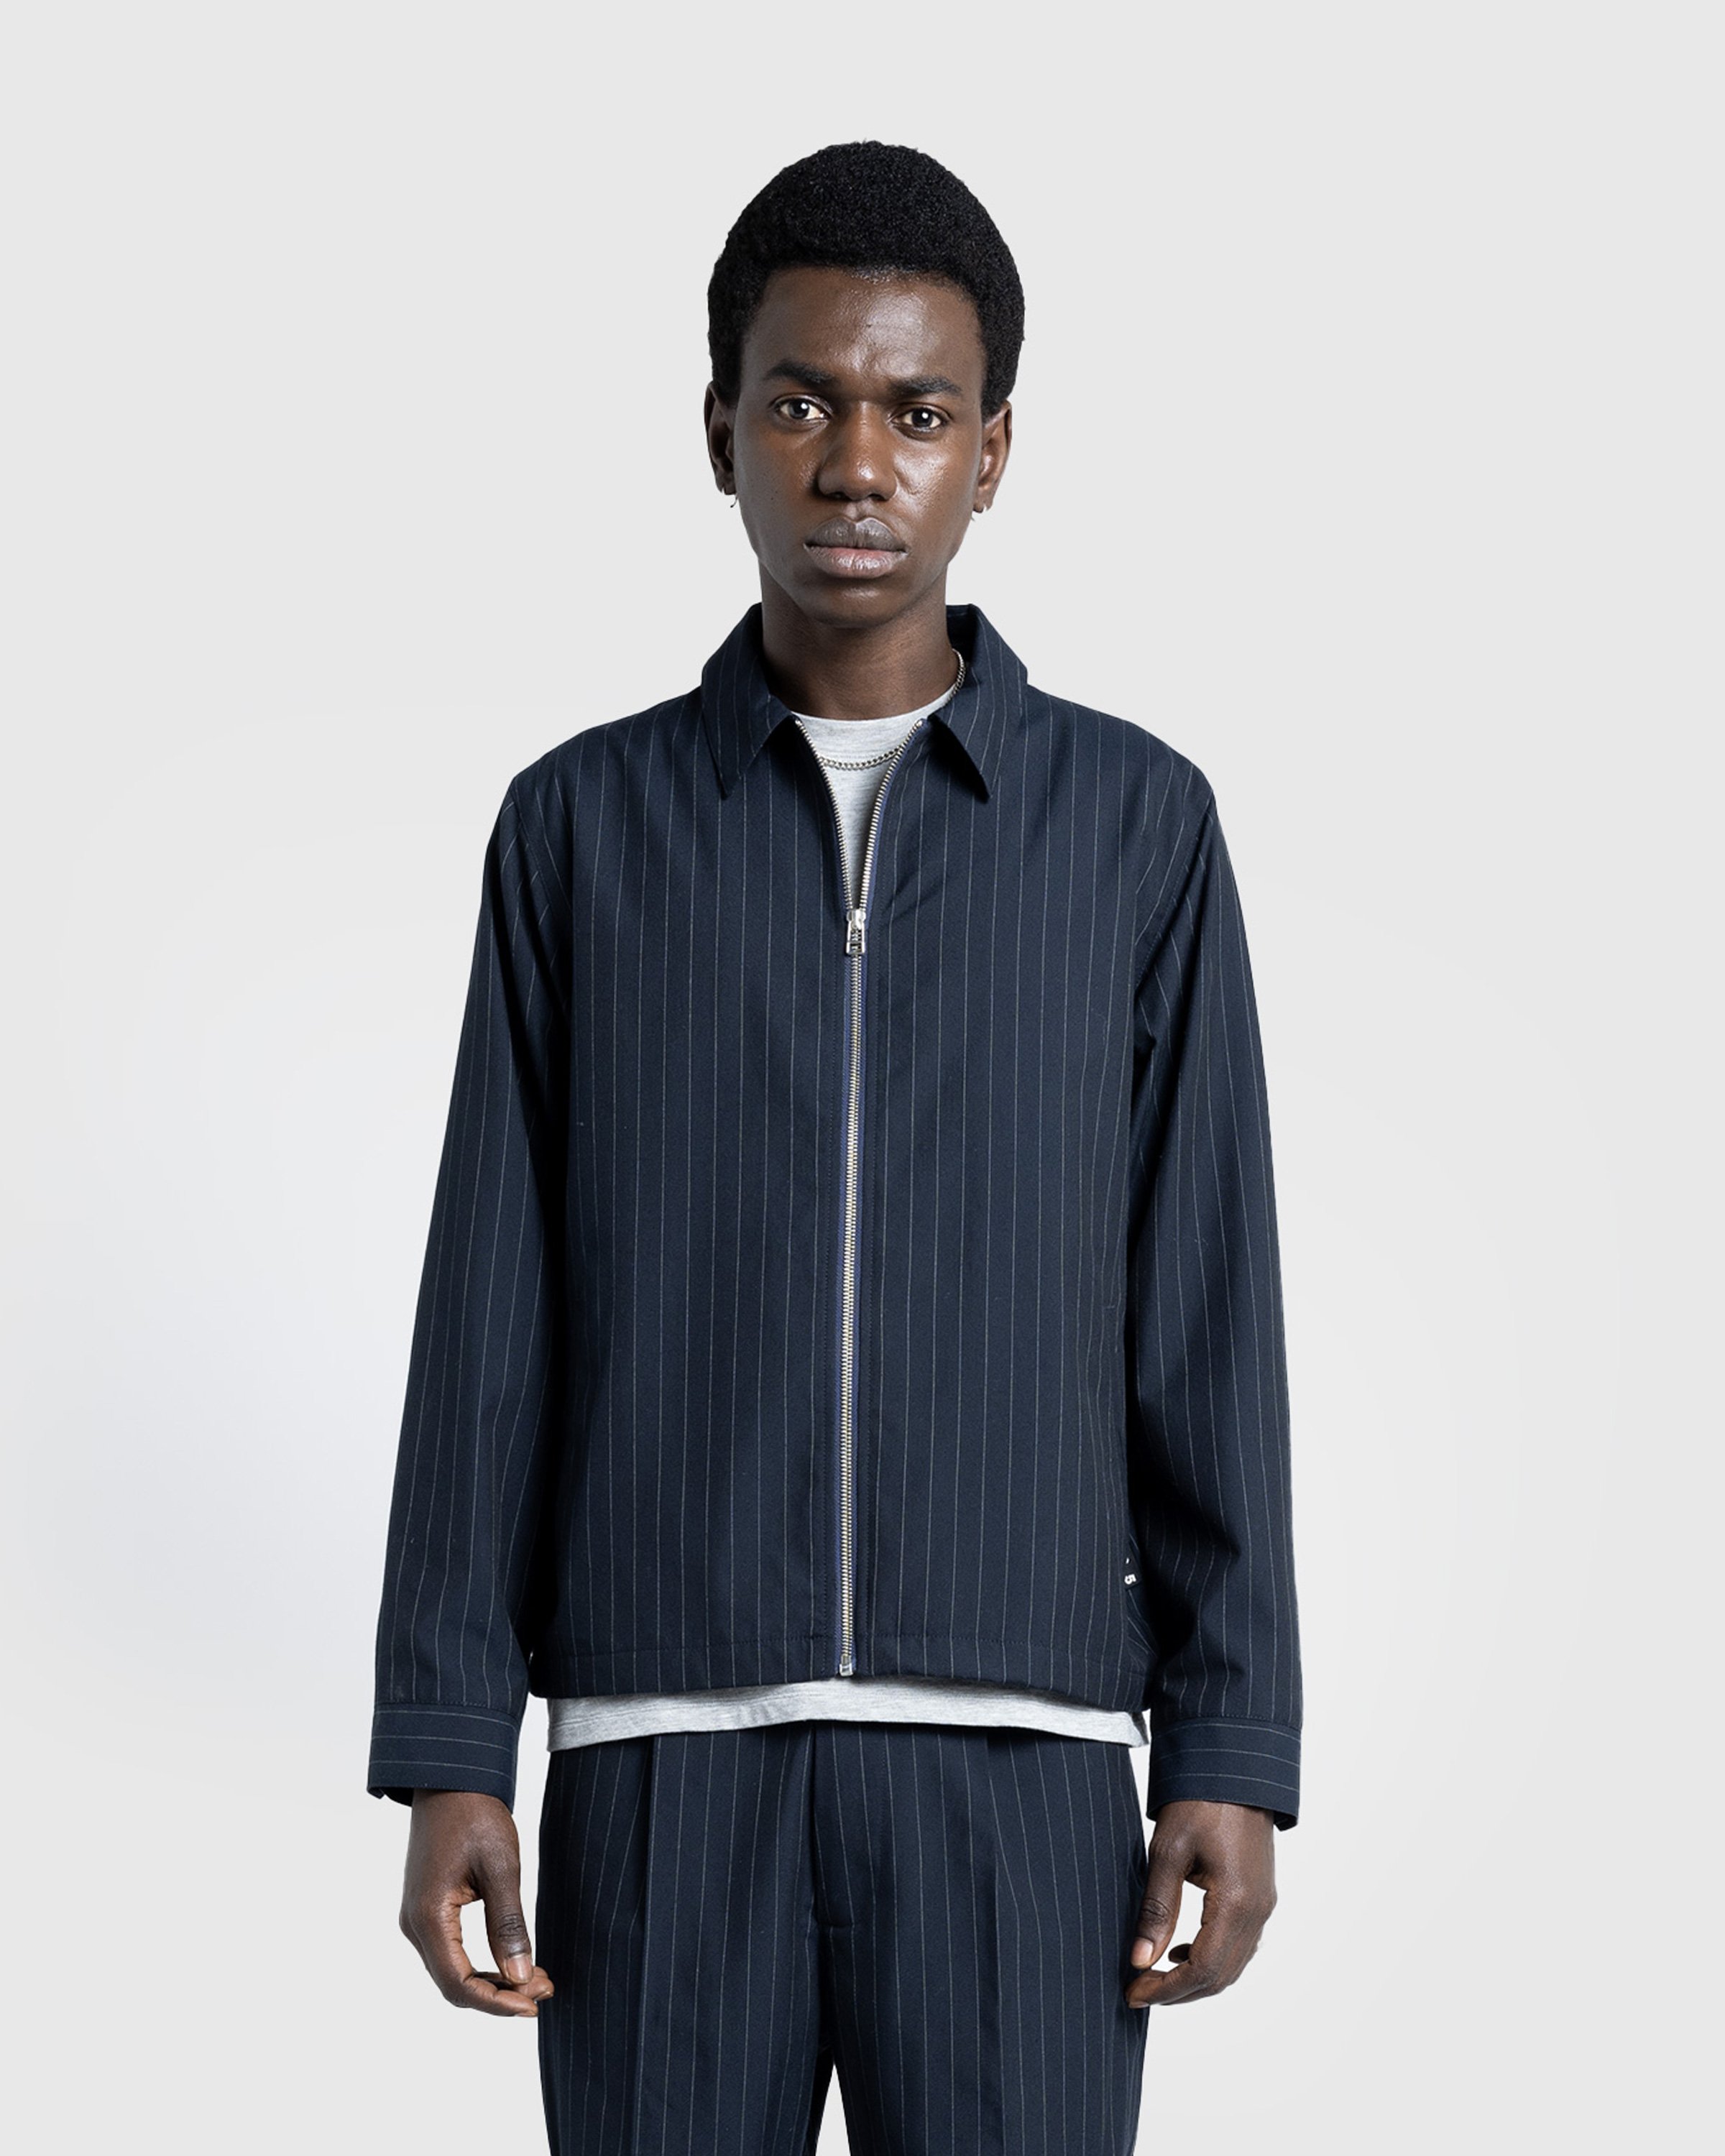 Highsnobiety HS05 - Tropical Suiting Jacket Stripes Navy - Clothing - Stripes Navy - Image 3